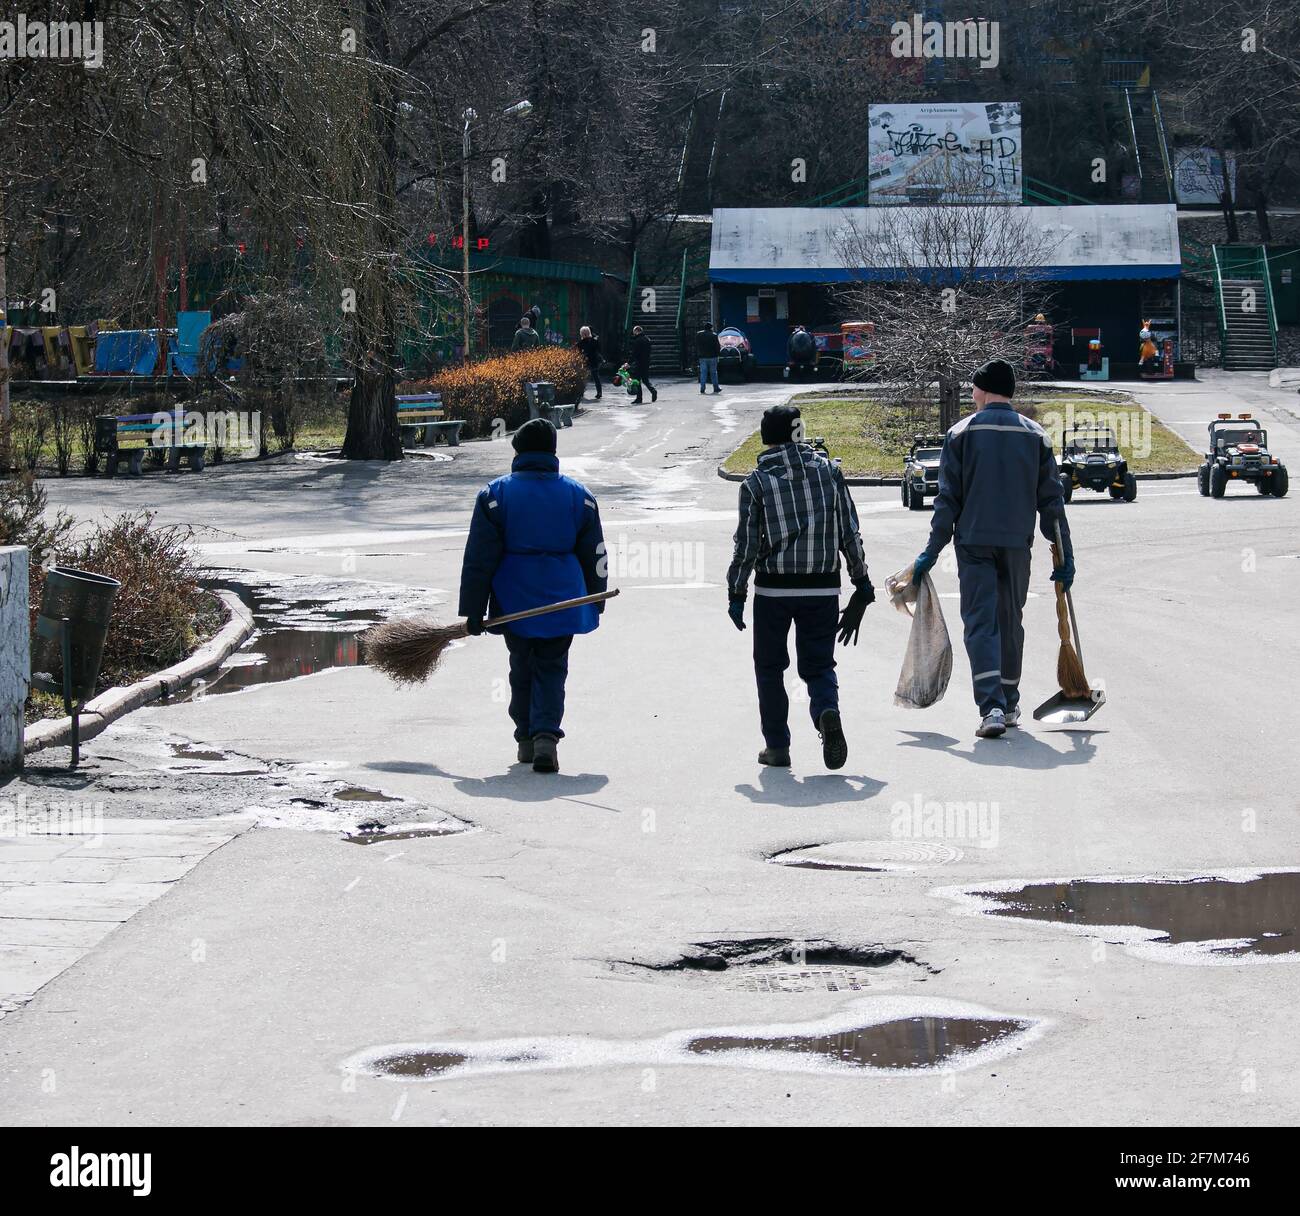 Municipal service workers carry brooms and shovels. Workers cleaned the park after winter. Stock Photo